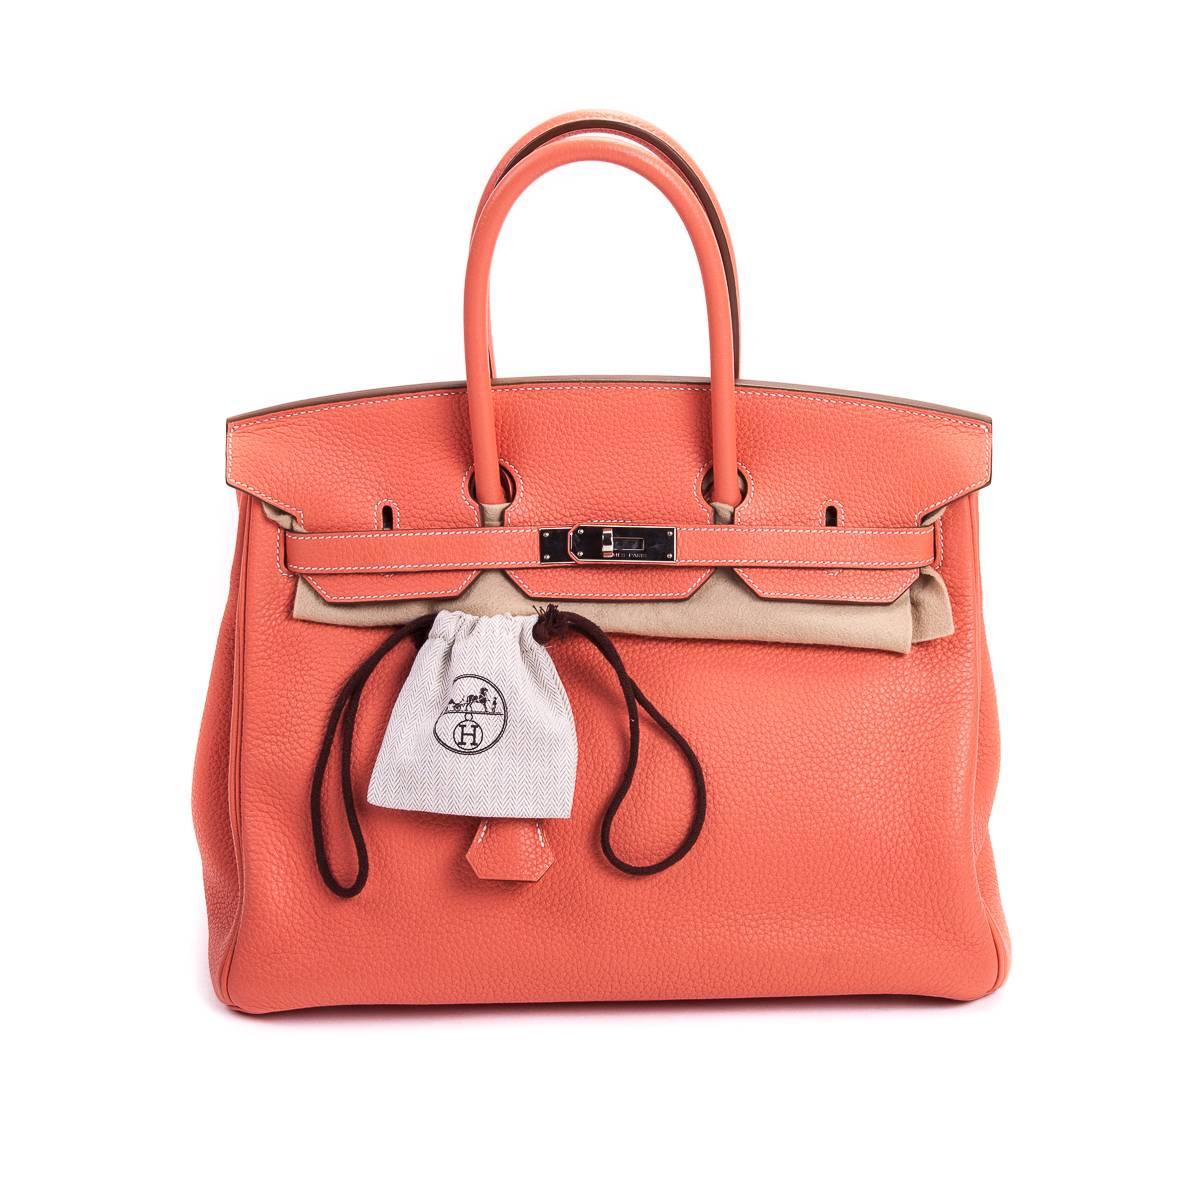 Hermes Birkin Handbag 35 in Crevette Clemence Leather with Palladium  In Excellent Condition For Sale In Toronto, Ontario